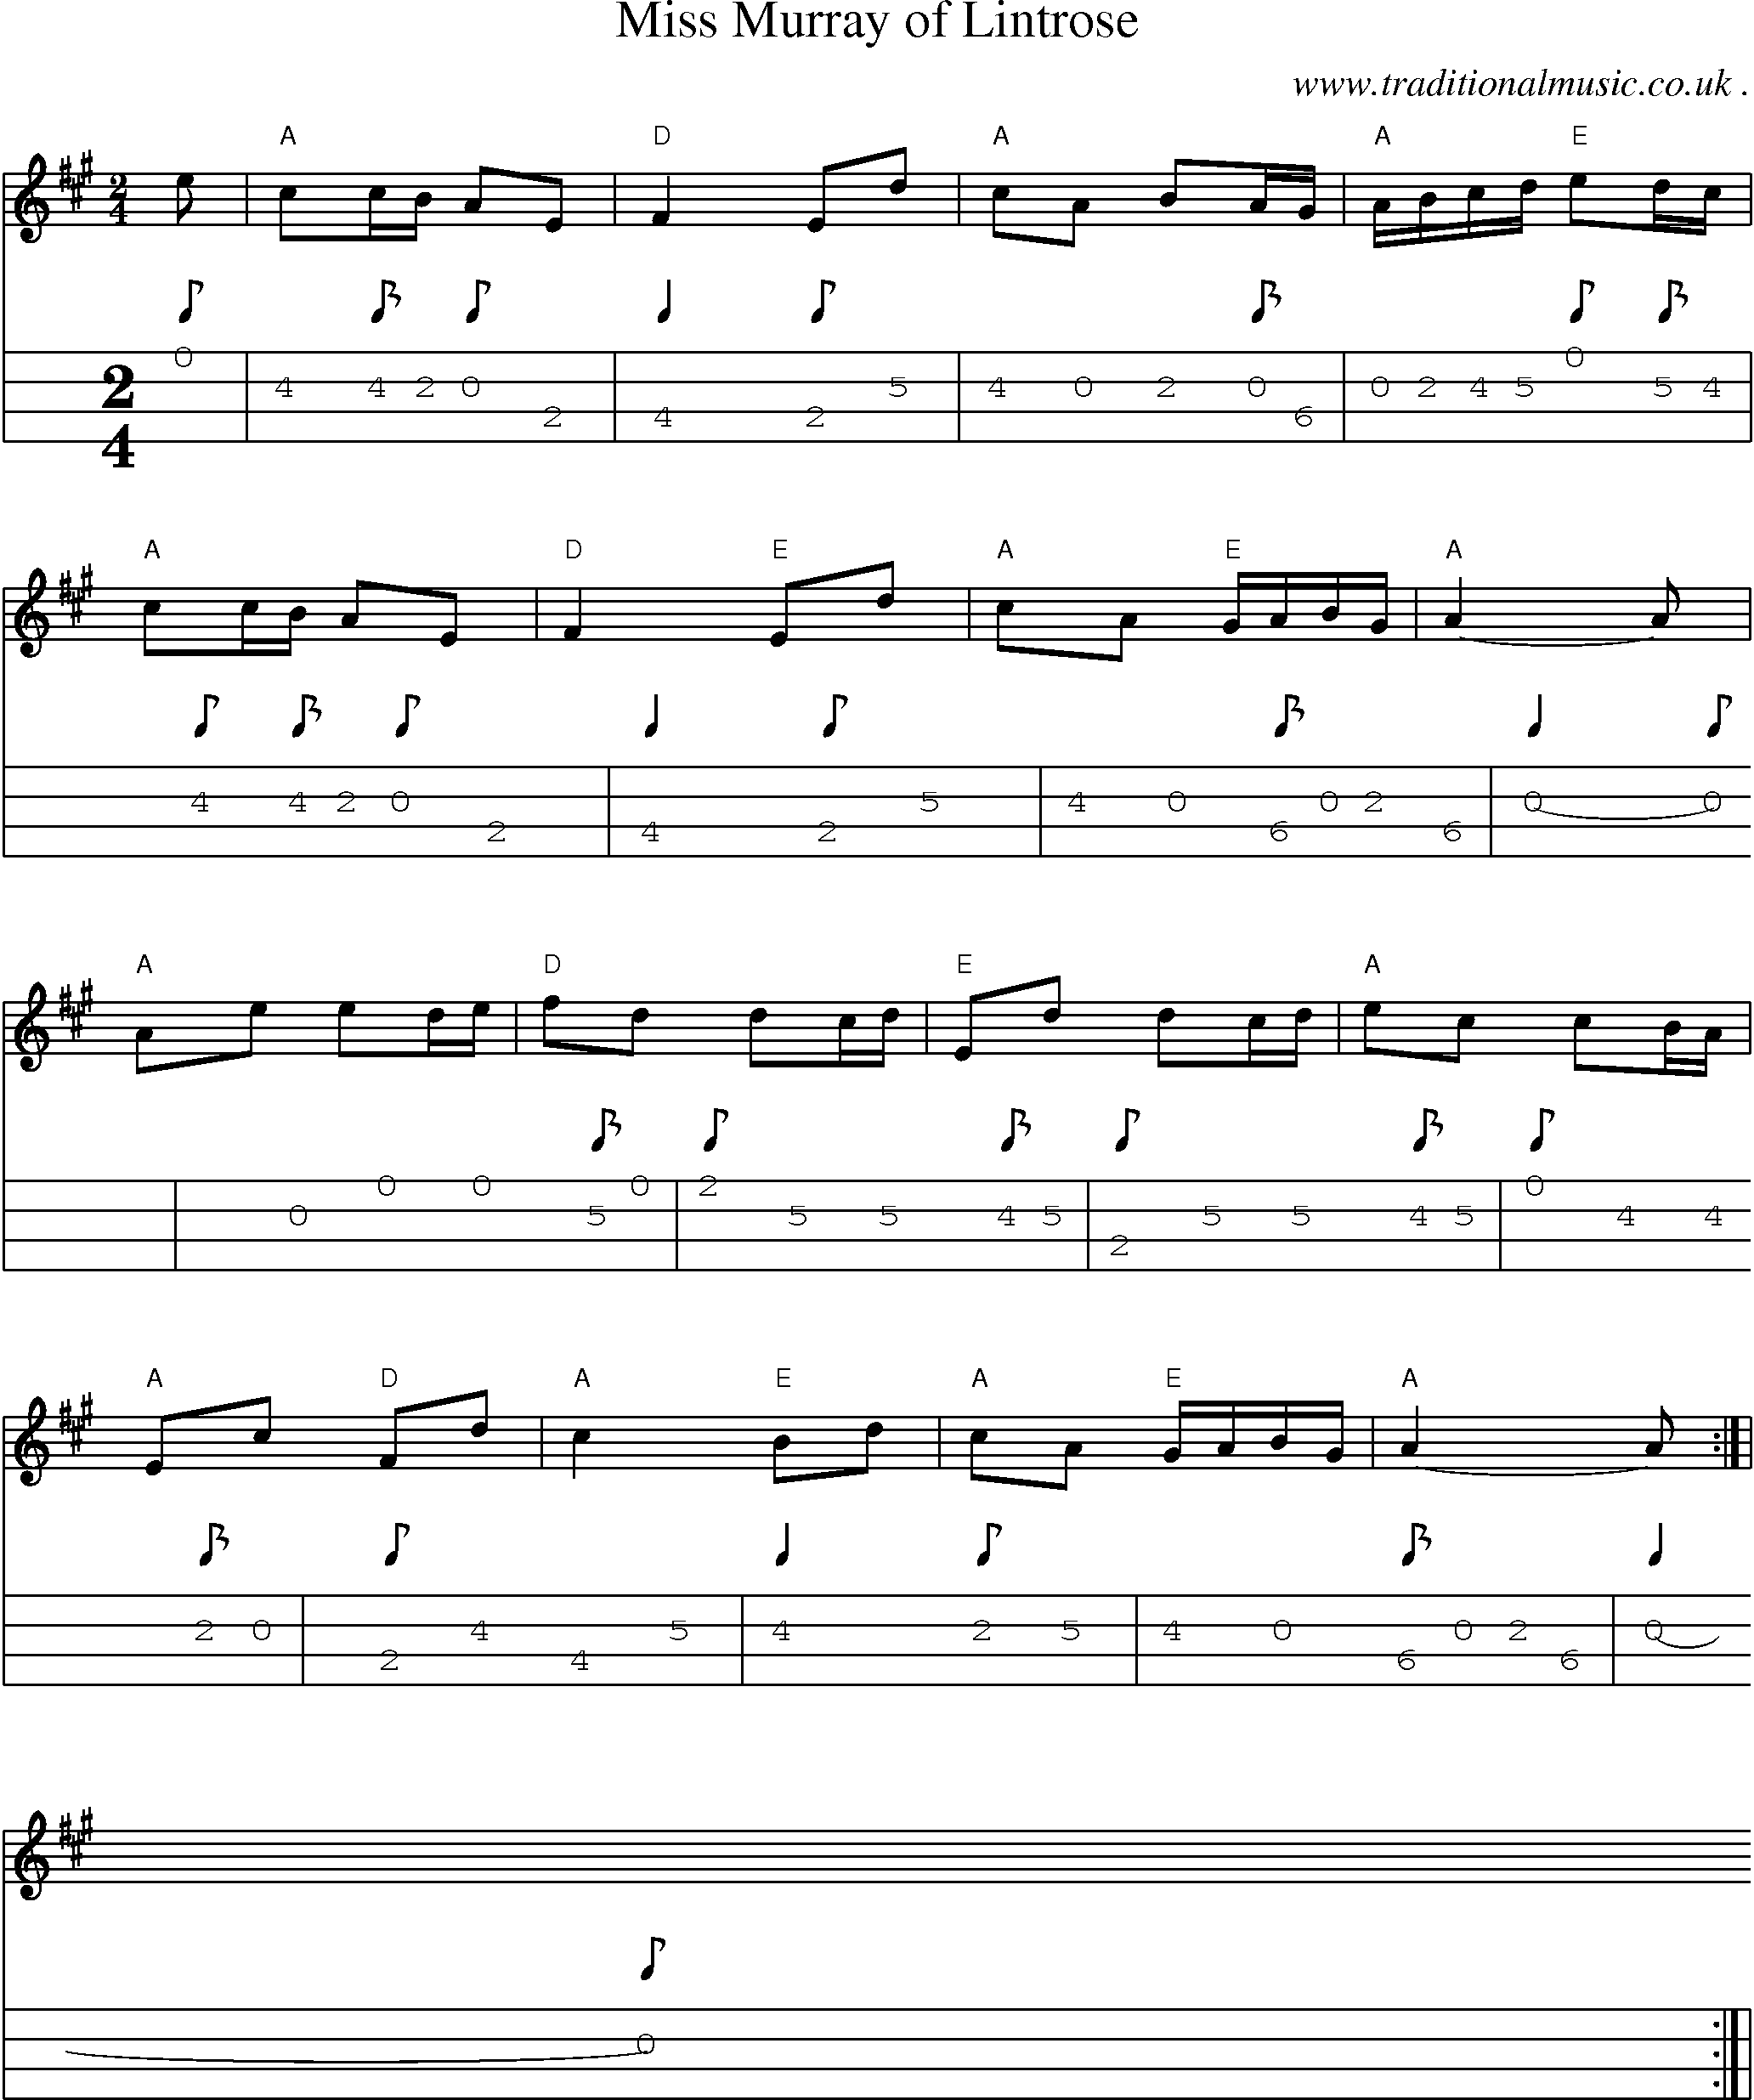 Sheet-music  score, Chords and Mandolin Tabs for Miss Murray Of Lintrose